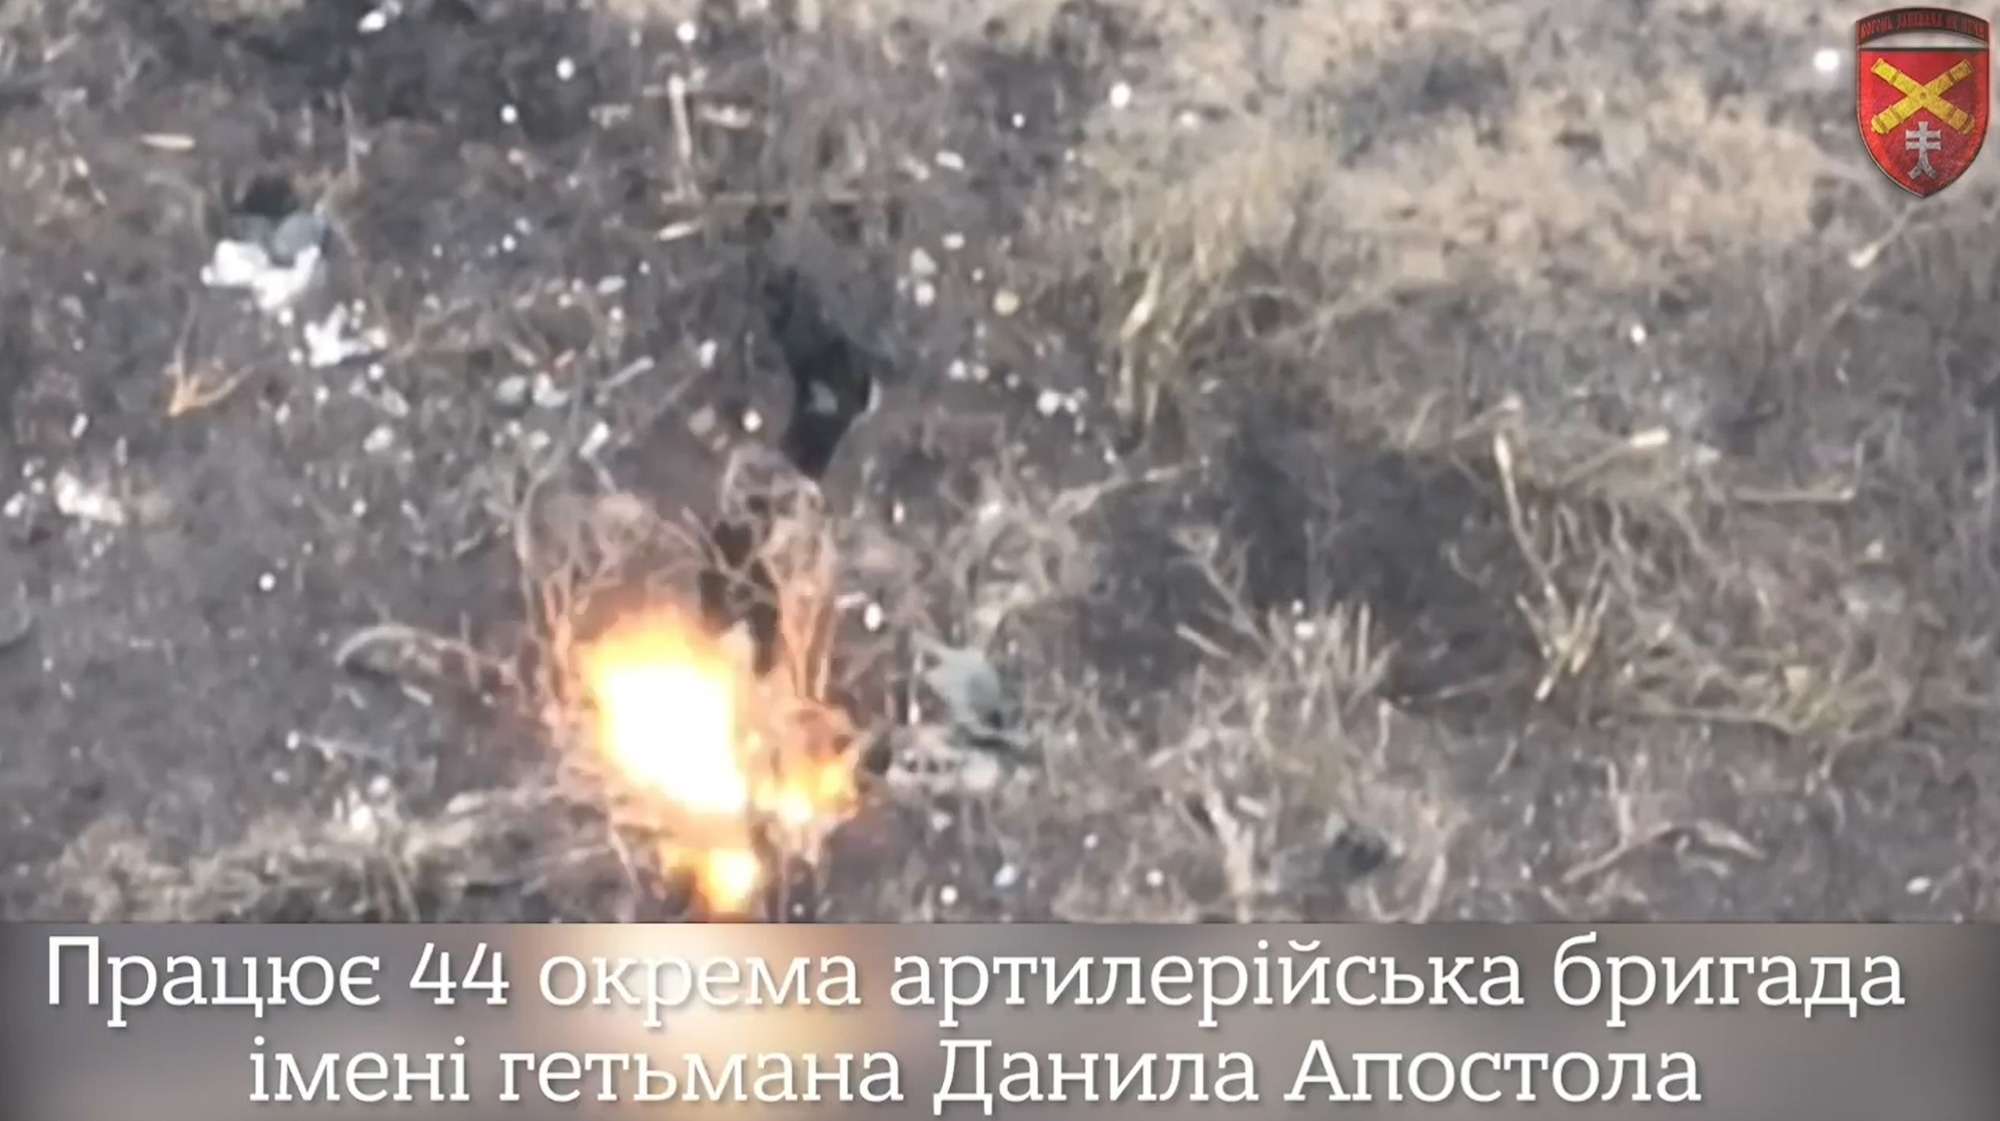 Read more about the article Ukrainian Artillery Destroys Russian Tank And Eliminates Several Soldiers In Trenches